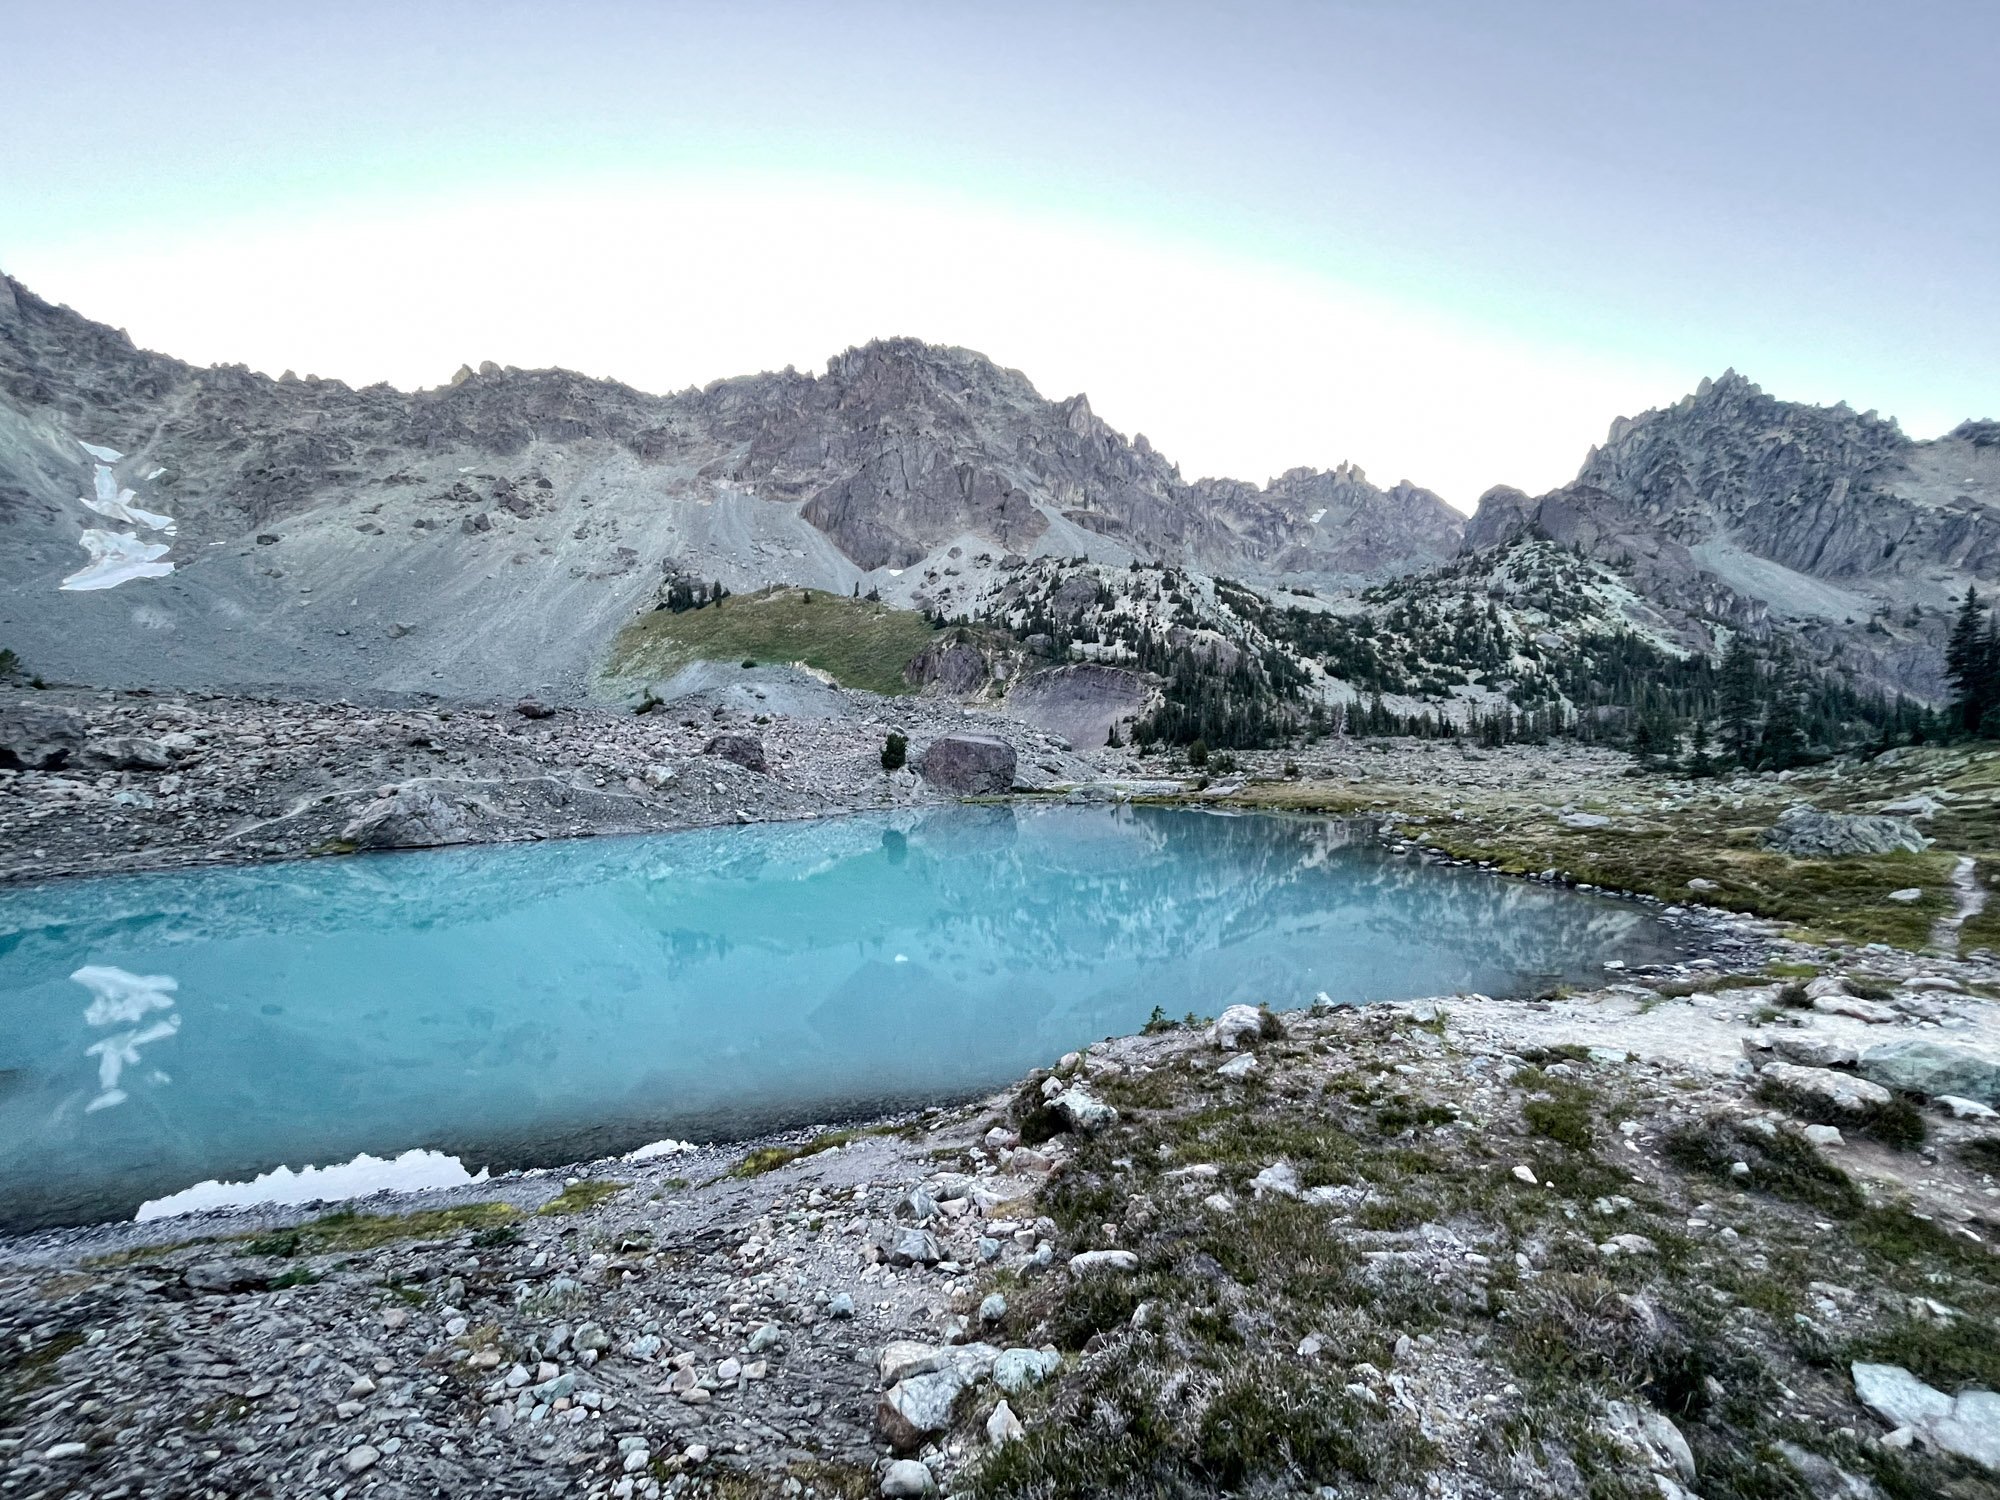 evening in the upper basin, camping on rocks